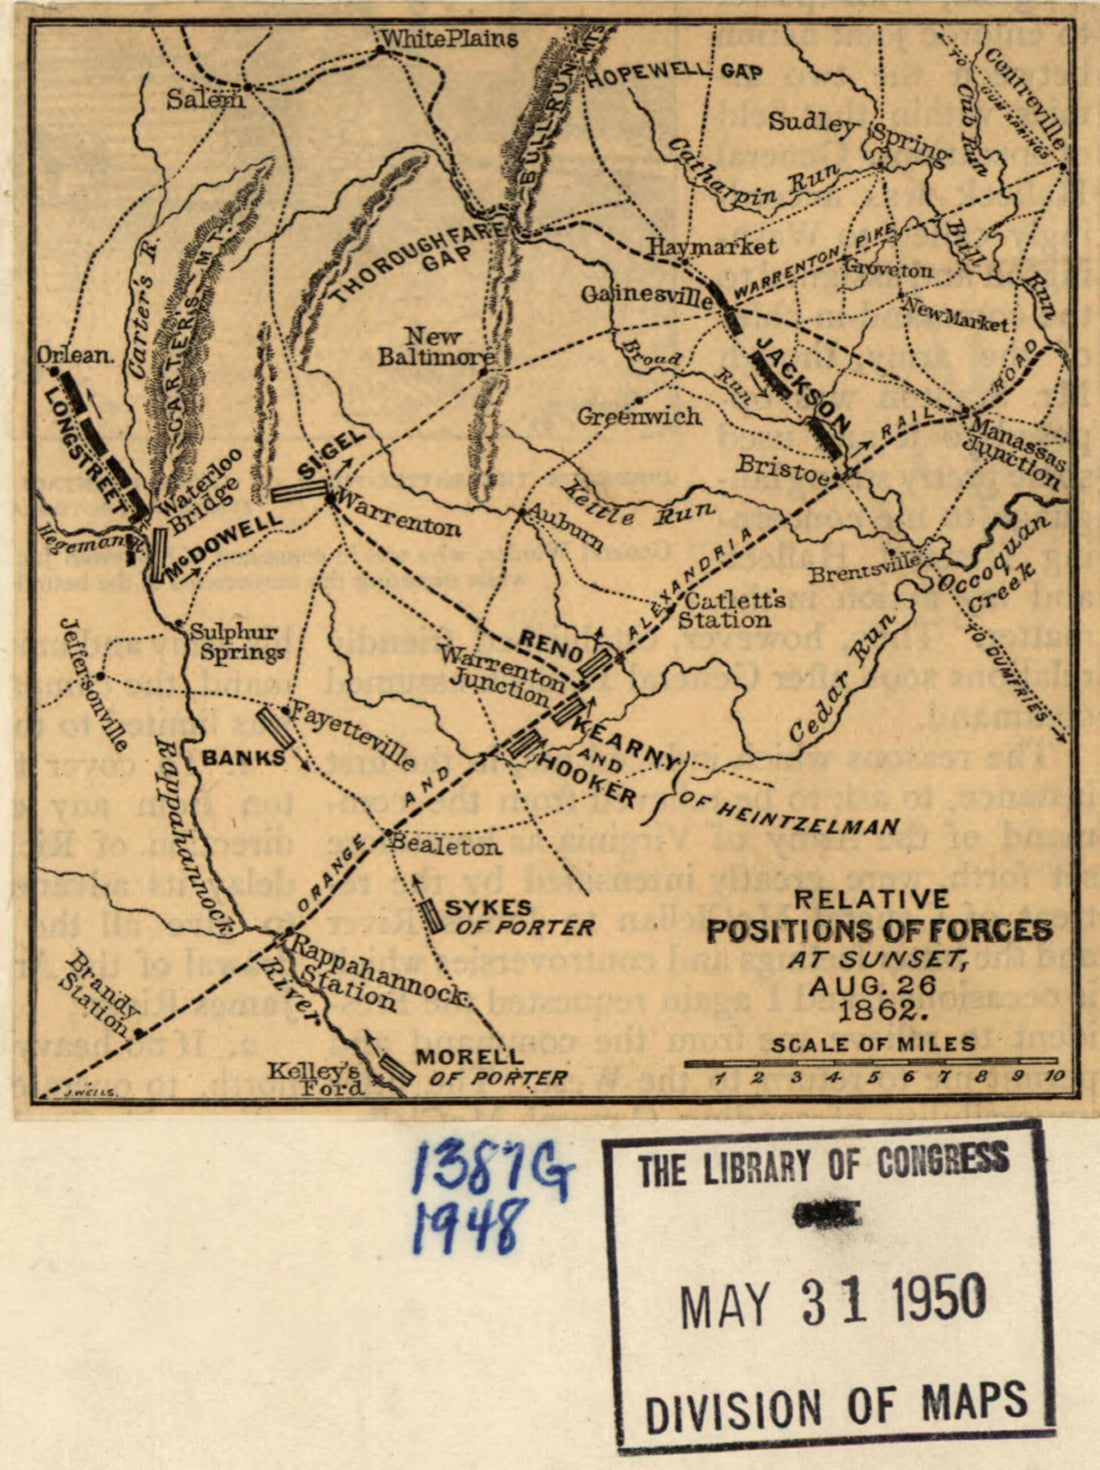 This old map of Relative Positions of Forces at Sunset, Aug. 26, 1862. 2nd Manassas Campaign from 1886 was created by Jacob Wells in 1886